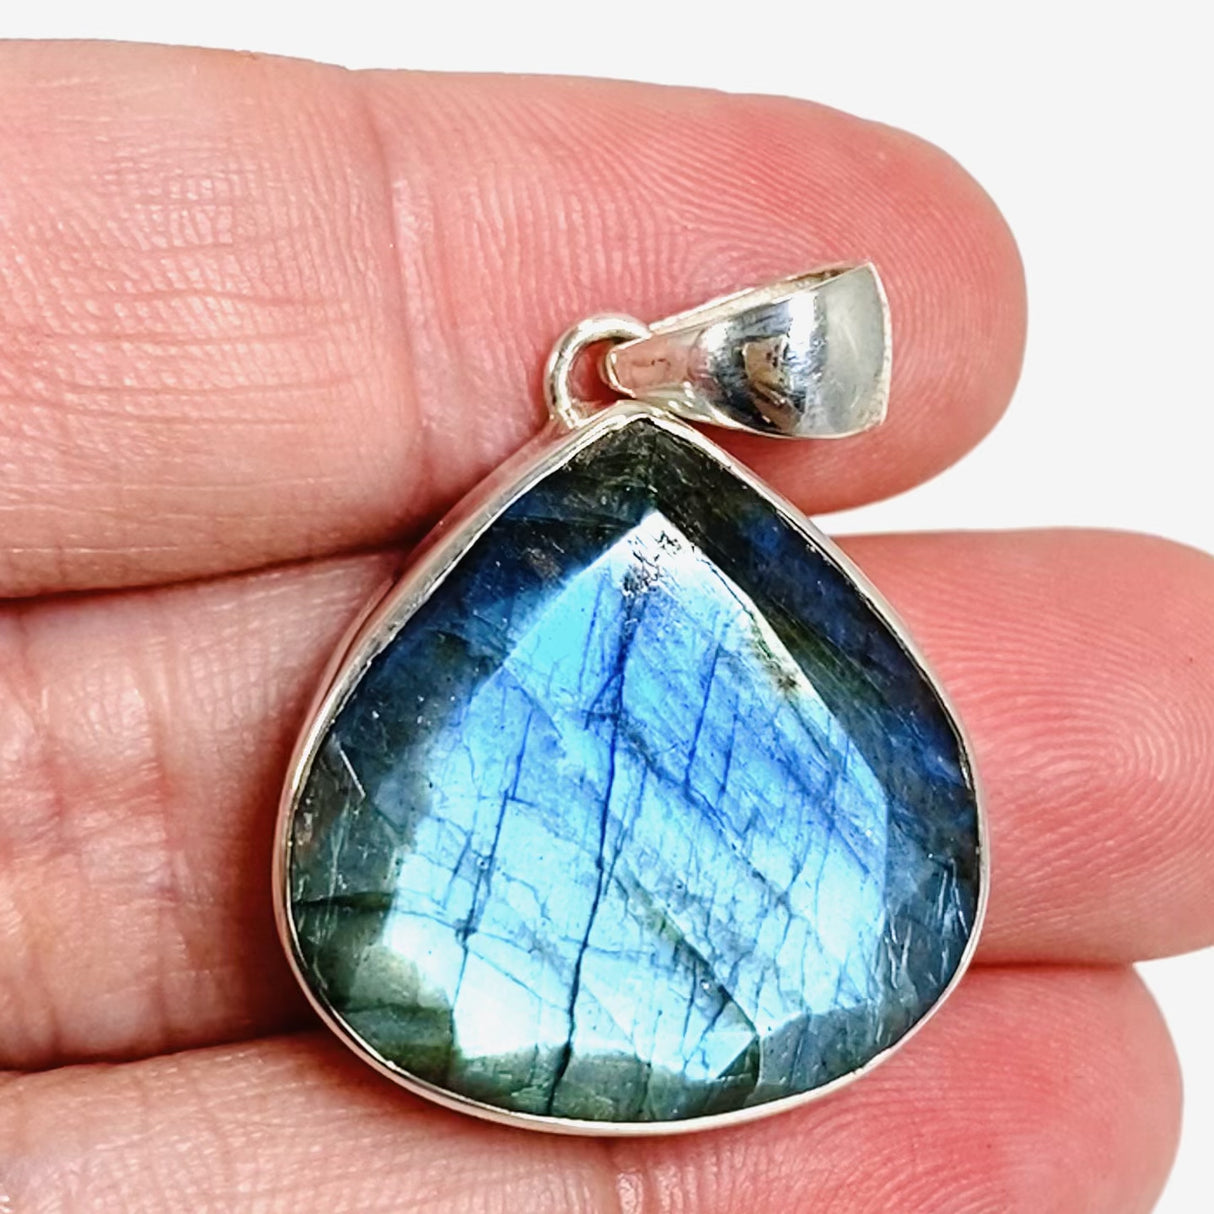 Blue iridescent Labradorite faceted gemstone and silver pendant in hand on live video